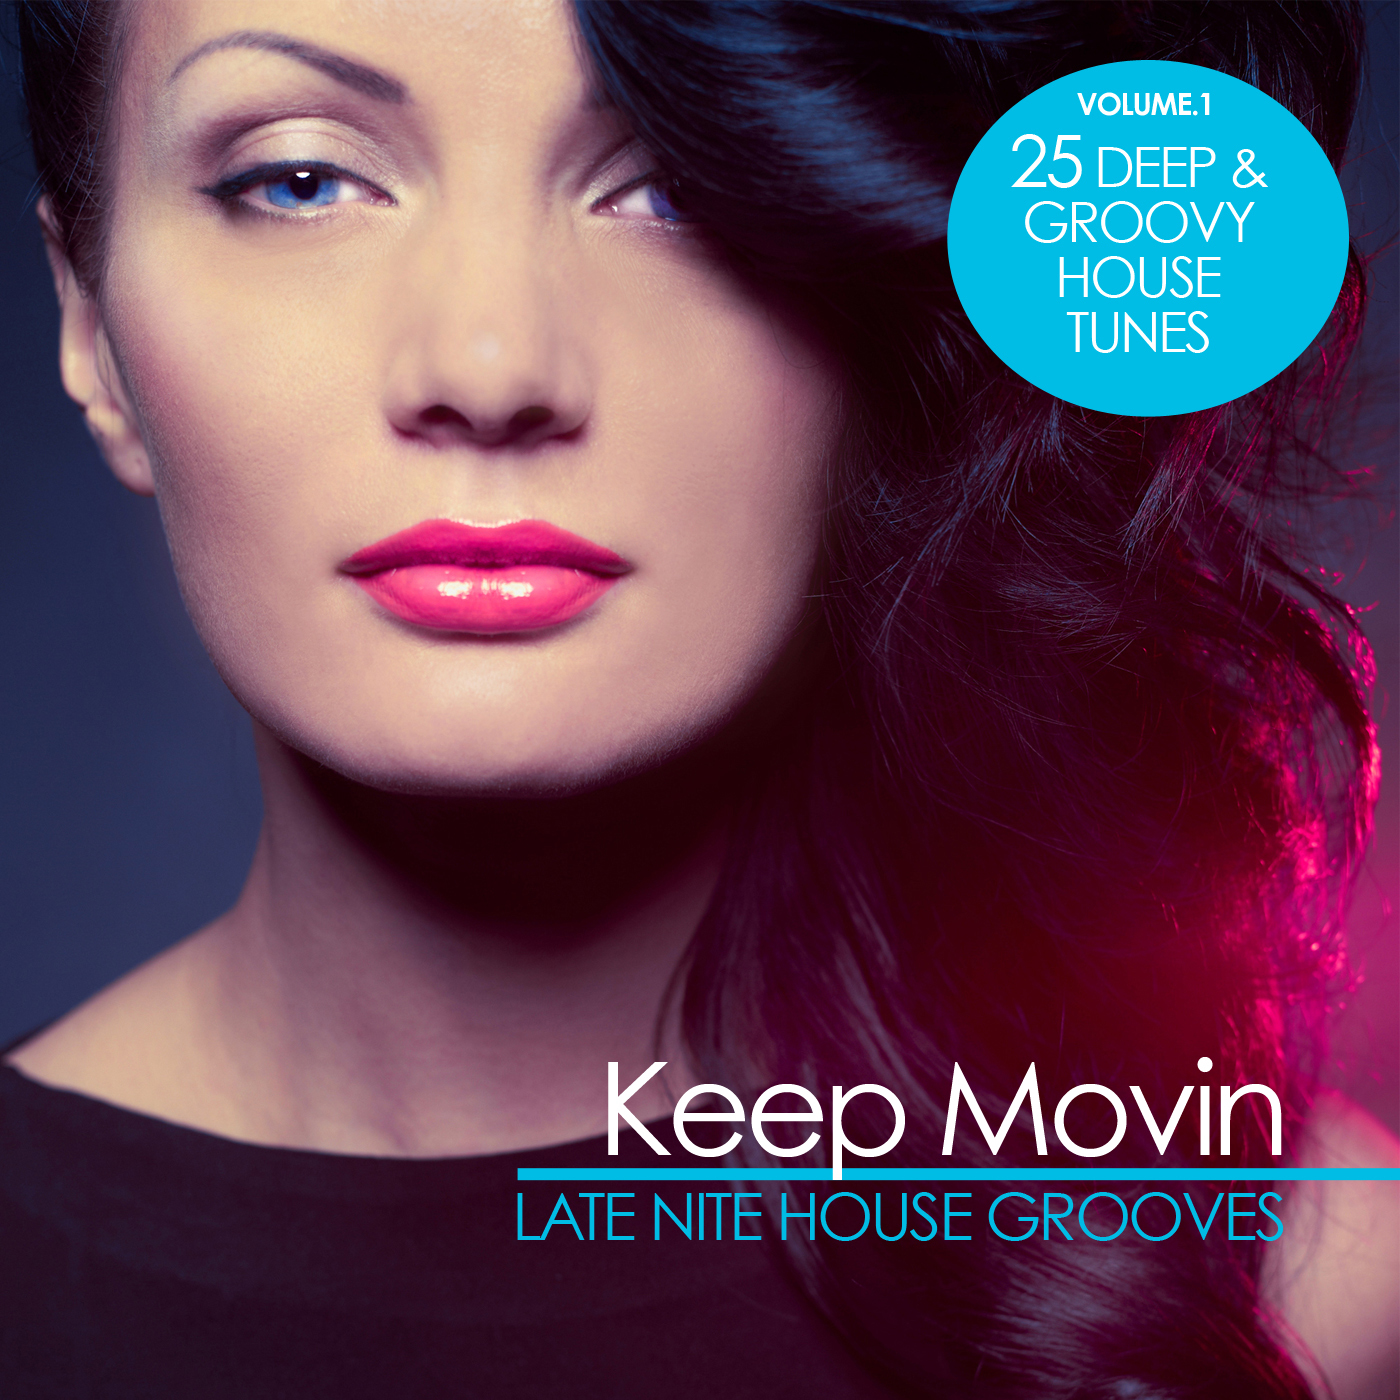 Keep Movin - Late Nite House Grooves, Vol. 1